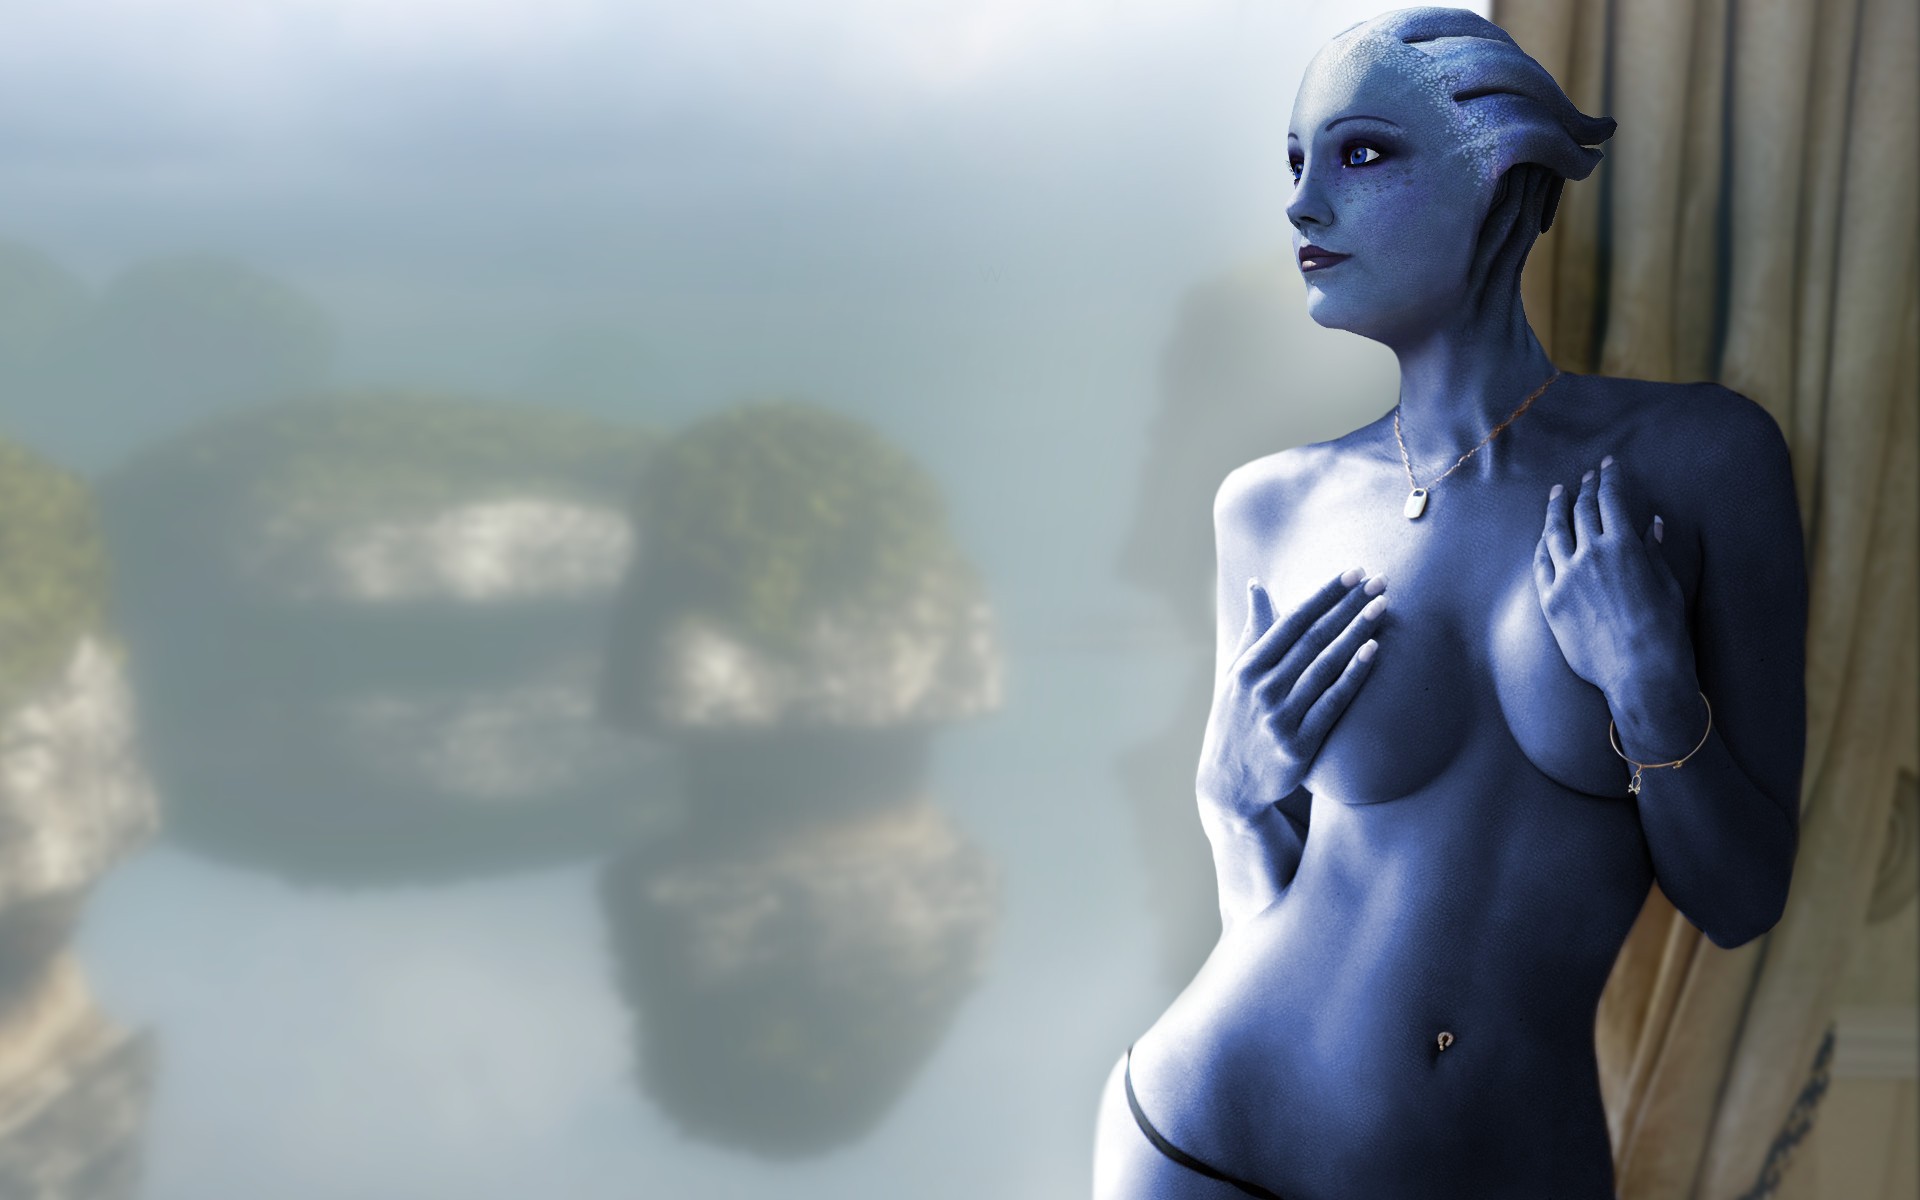 General 1920x1200 Liara T'Soni topless Mass Effect Asari video game characters video game girls science fiction science fiction women boobs hands on boobs video games PC gaming fan art digital art necklace blue skin